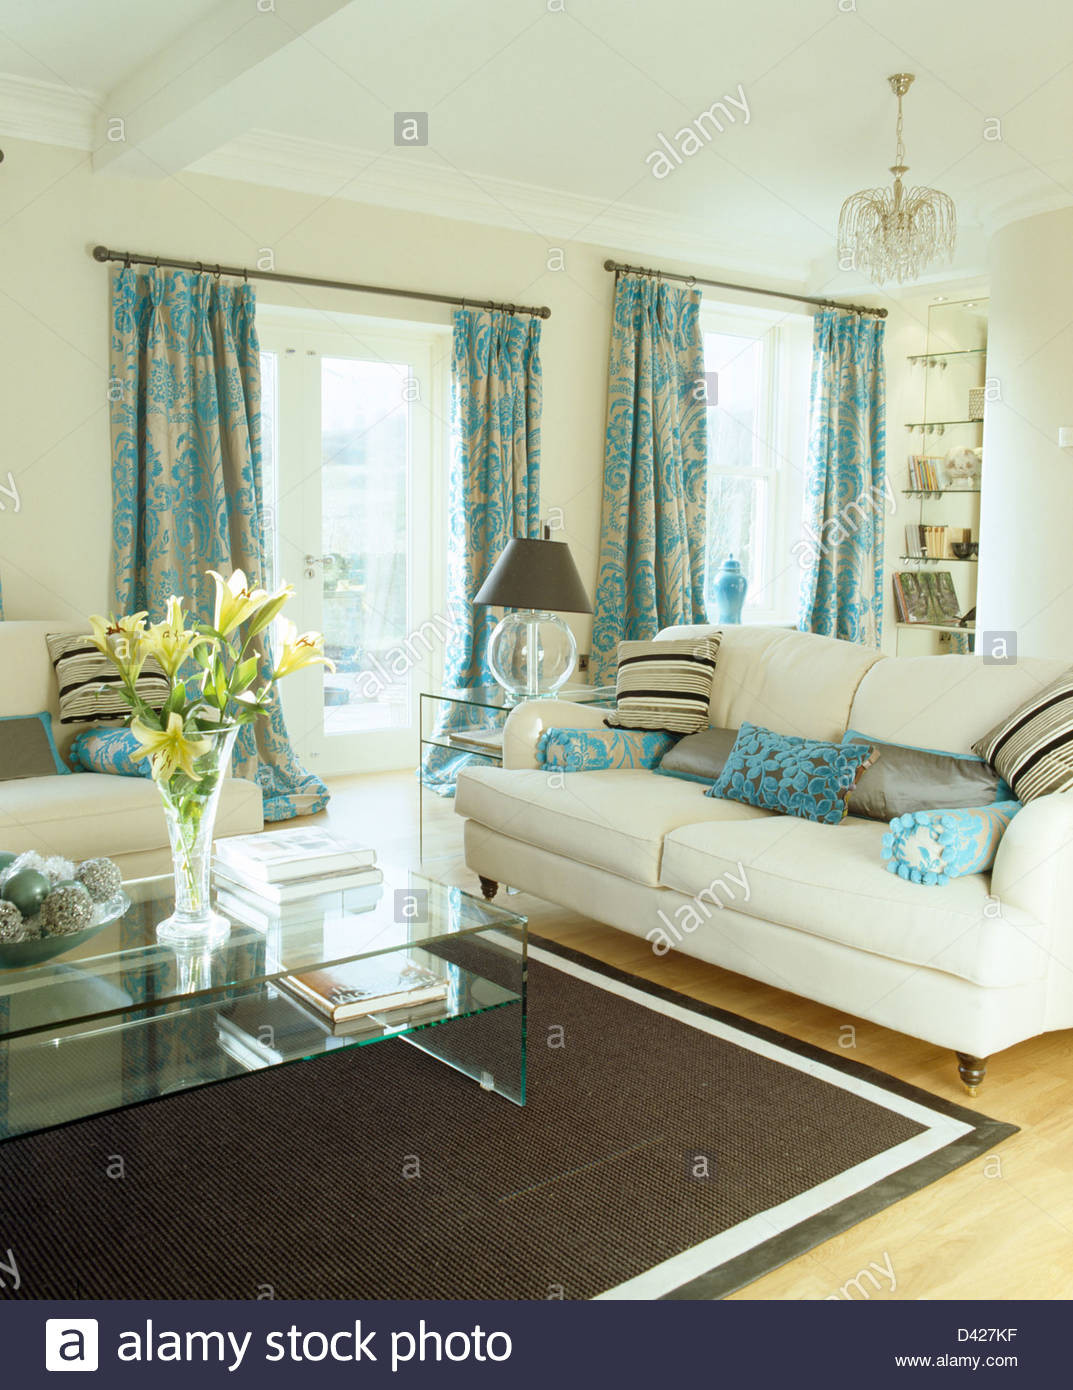 Turquoise Curtains Living Room
 Patterned turquoise curtains and cream sofas in cream